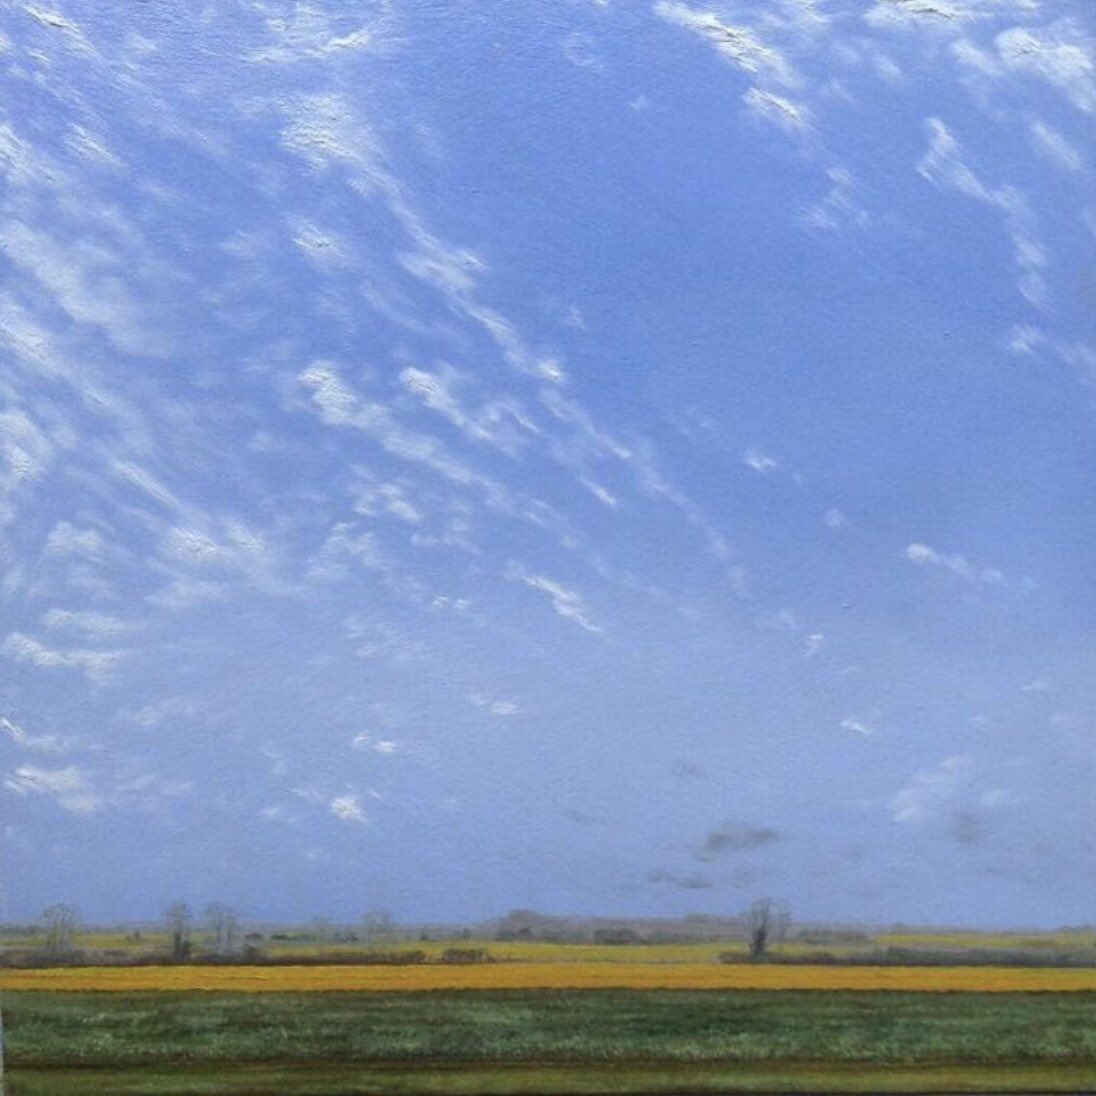 Field of #oilseed #flowering near #Ely in #Cambridgeshire #landscape #painting in oil on panel A3 square